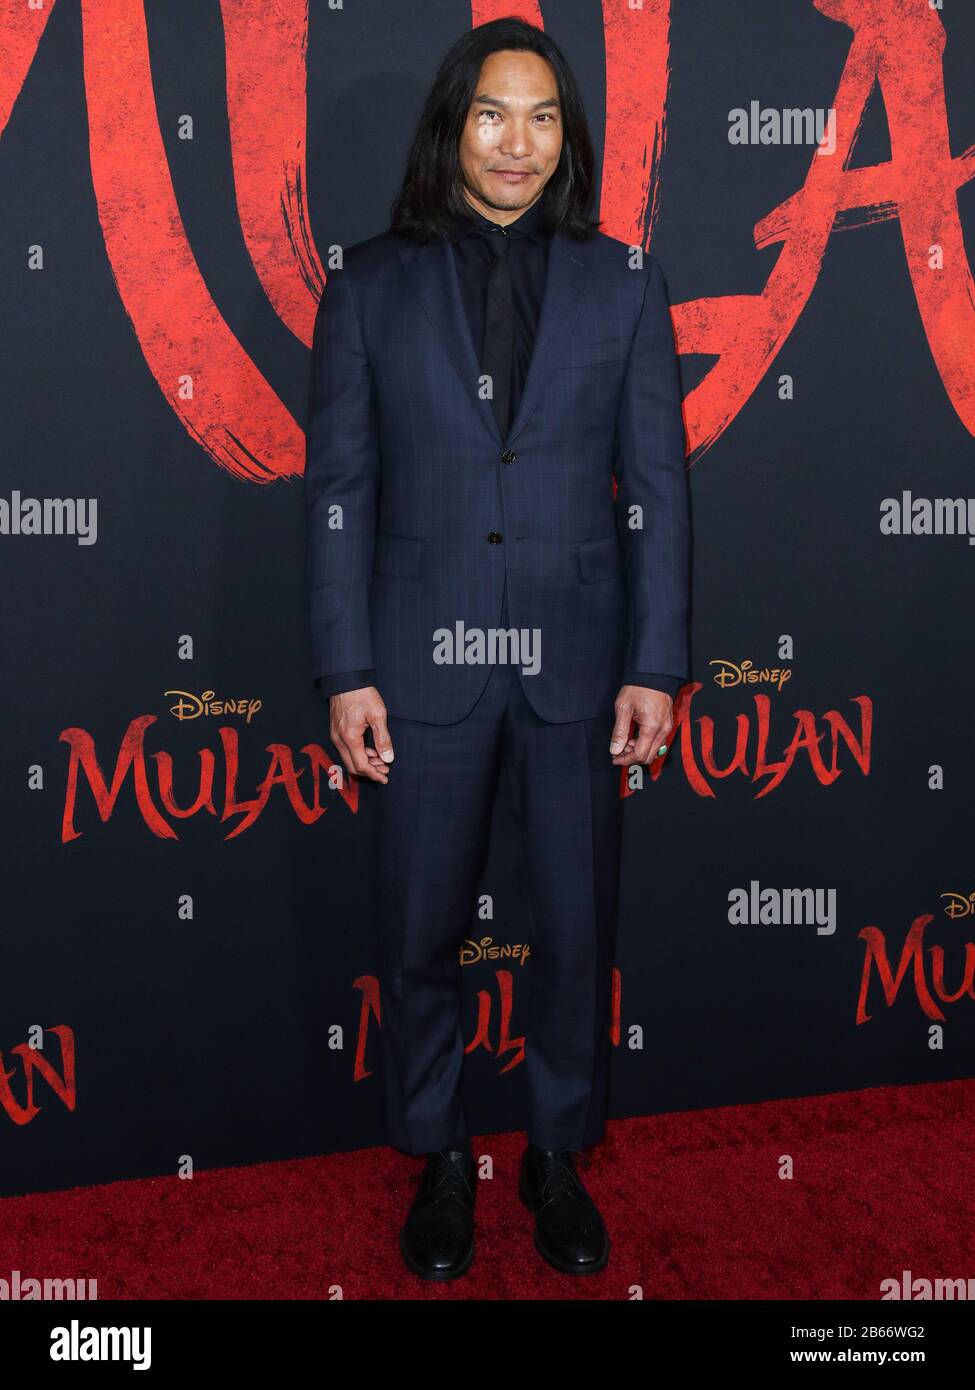 Hollywood, United States. 09th Mar, 2020. HOLLYWOOD, LOS ANGELES, CALIFORNIA, USA - MARCH 09: Actor Jason Scott Lee arrives at the World Premiere Of Disney's 'Mulan' held at the El Capitan Theatre and Dolby Theatre on March 9, 2020 in Hollywood, Los Angeles, California, United States. (Photo by Xavier Collin/Image Press Agency) Stock Photo